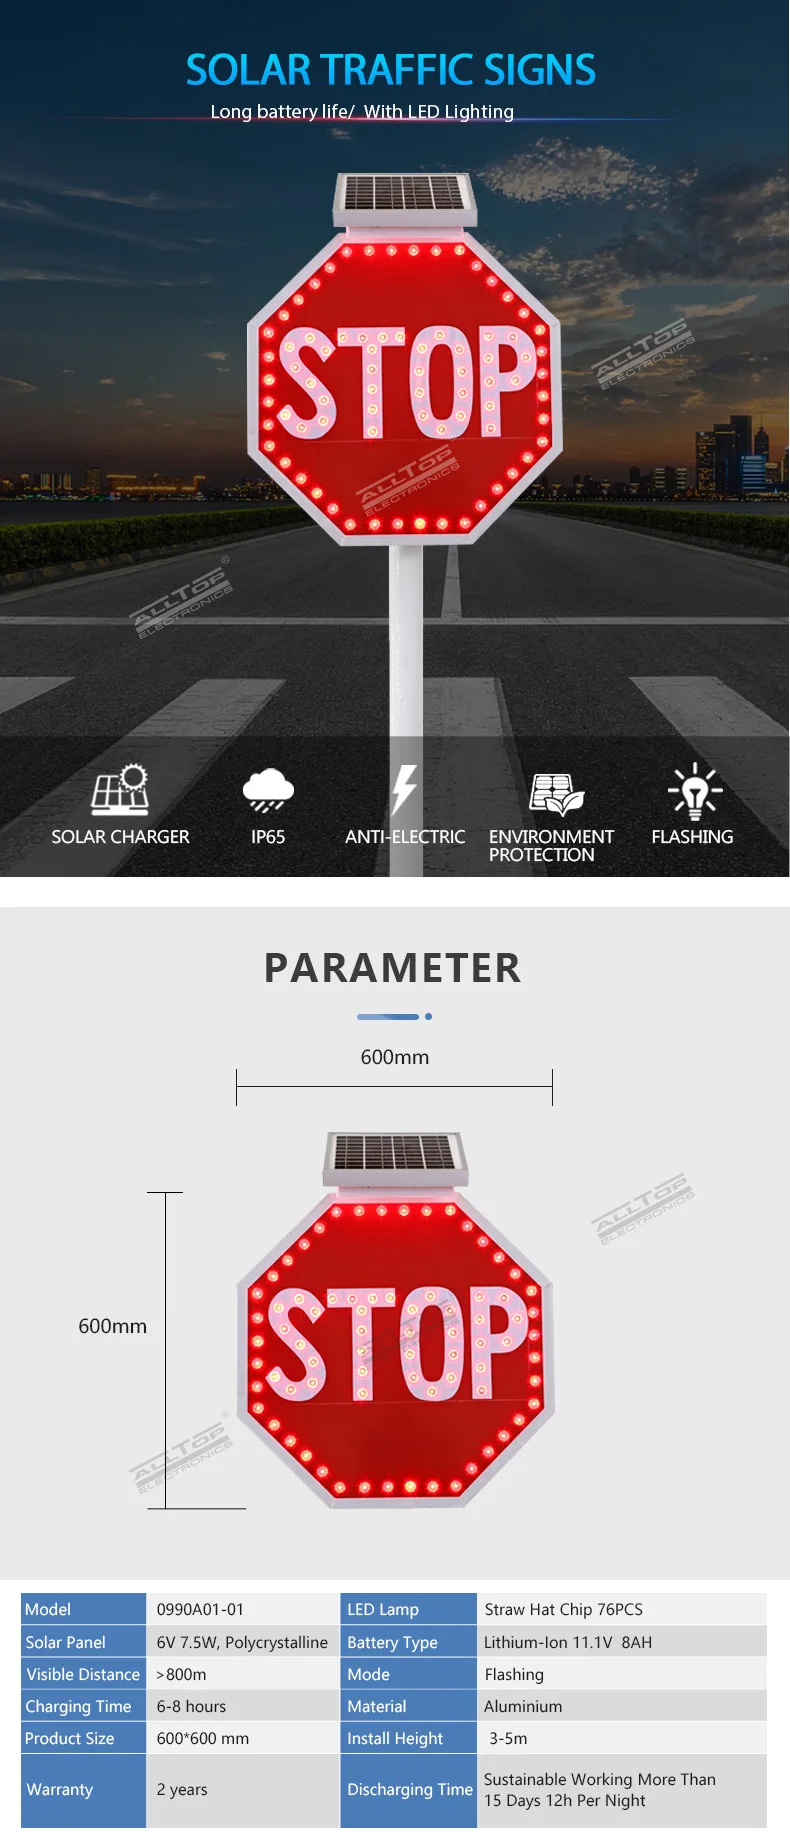 Best selling 24 hours continuous work OEM reflective aluminium led traffic solar road warning sign